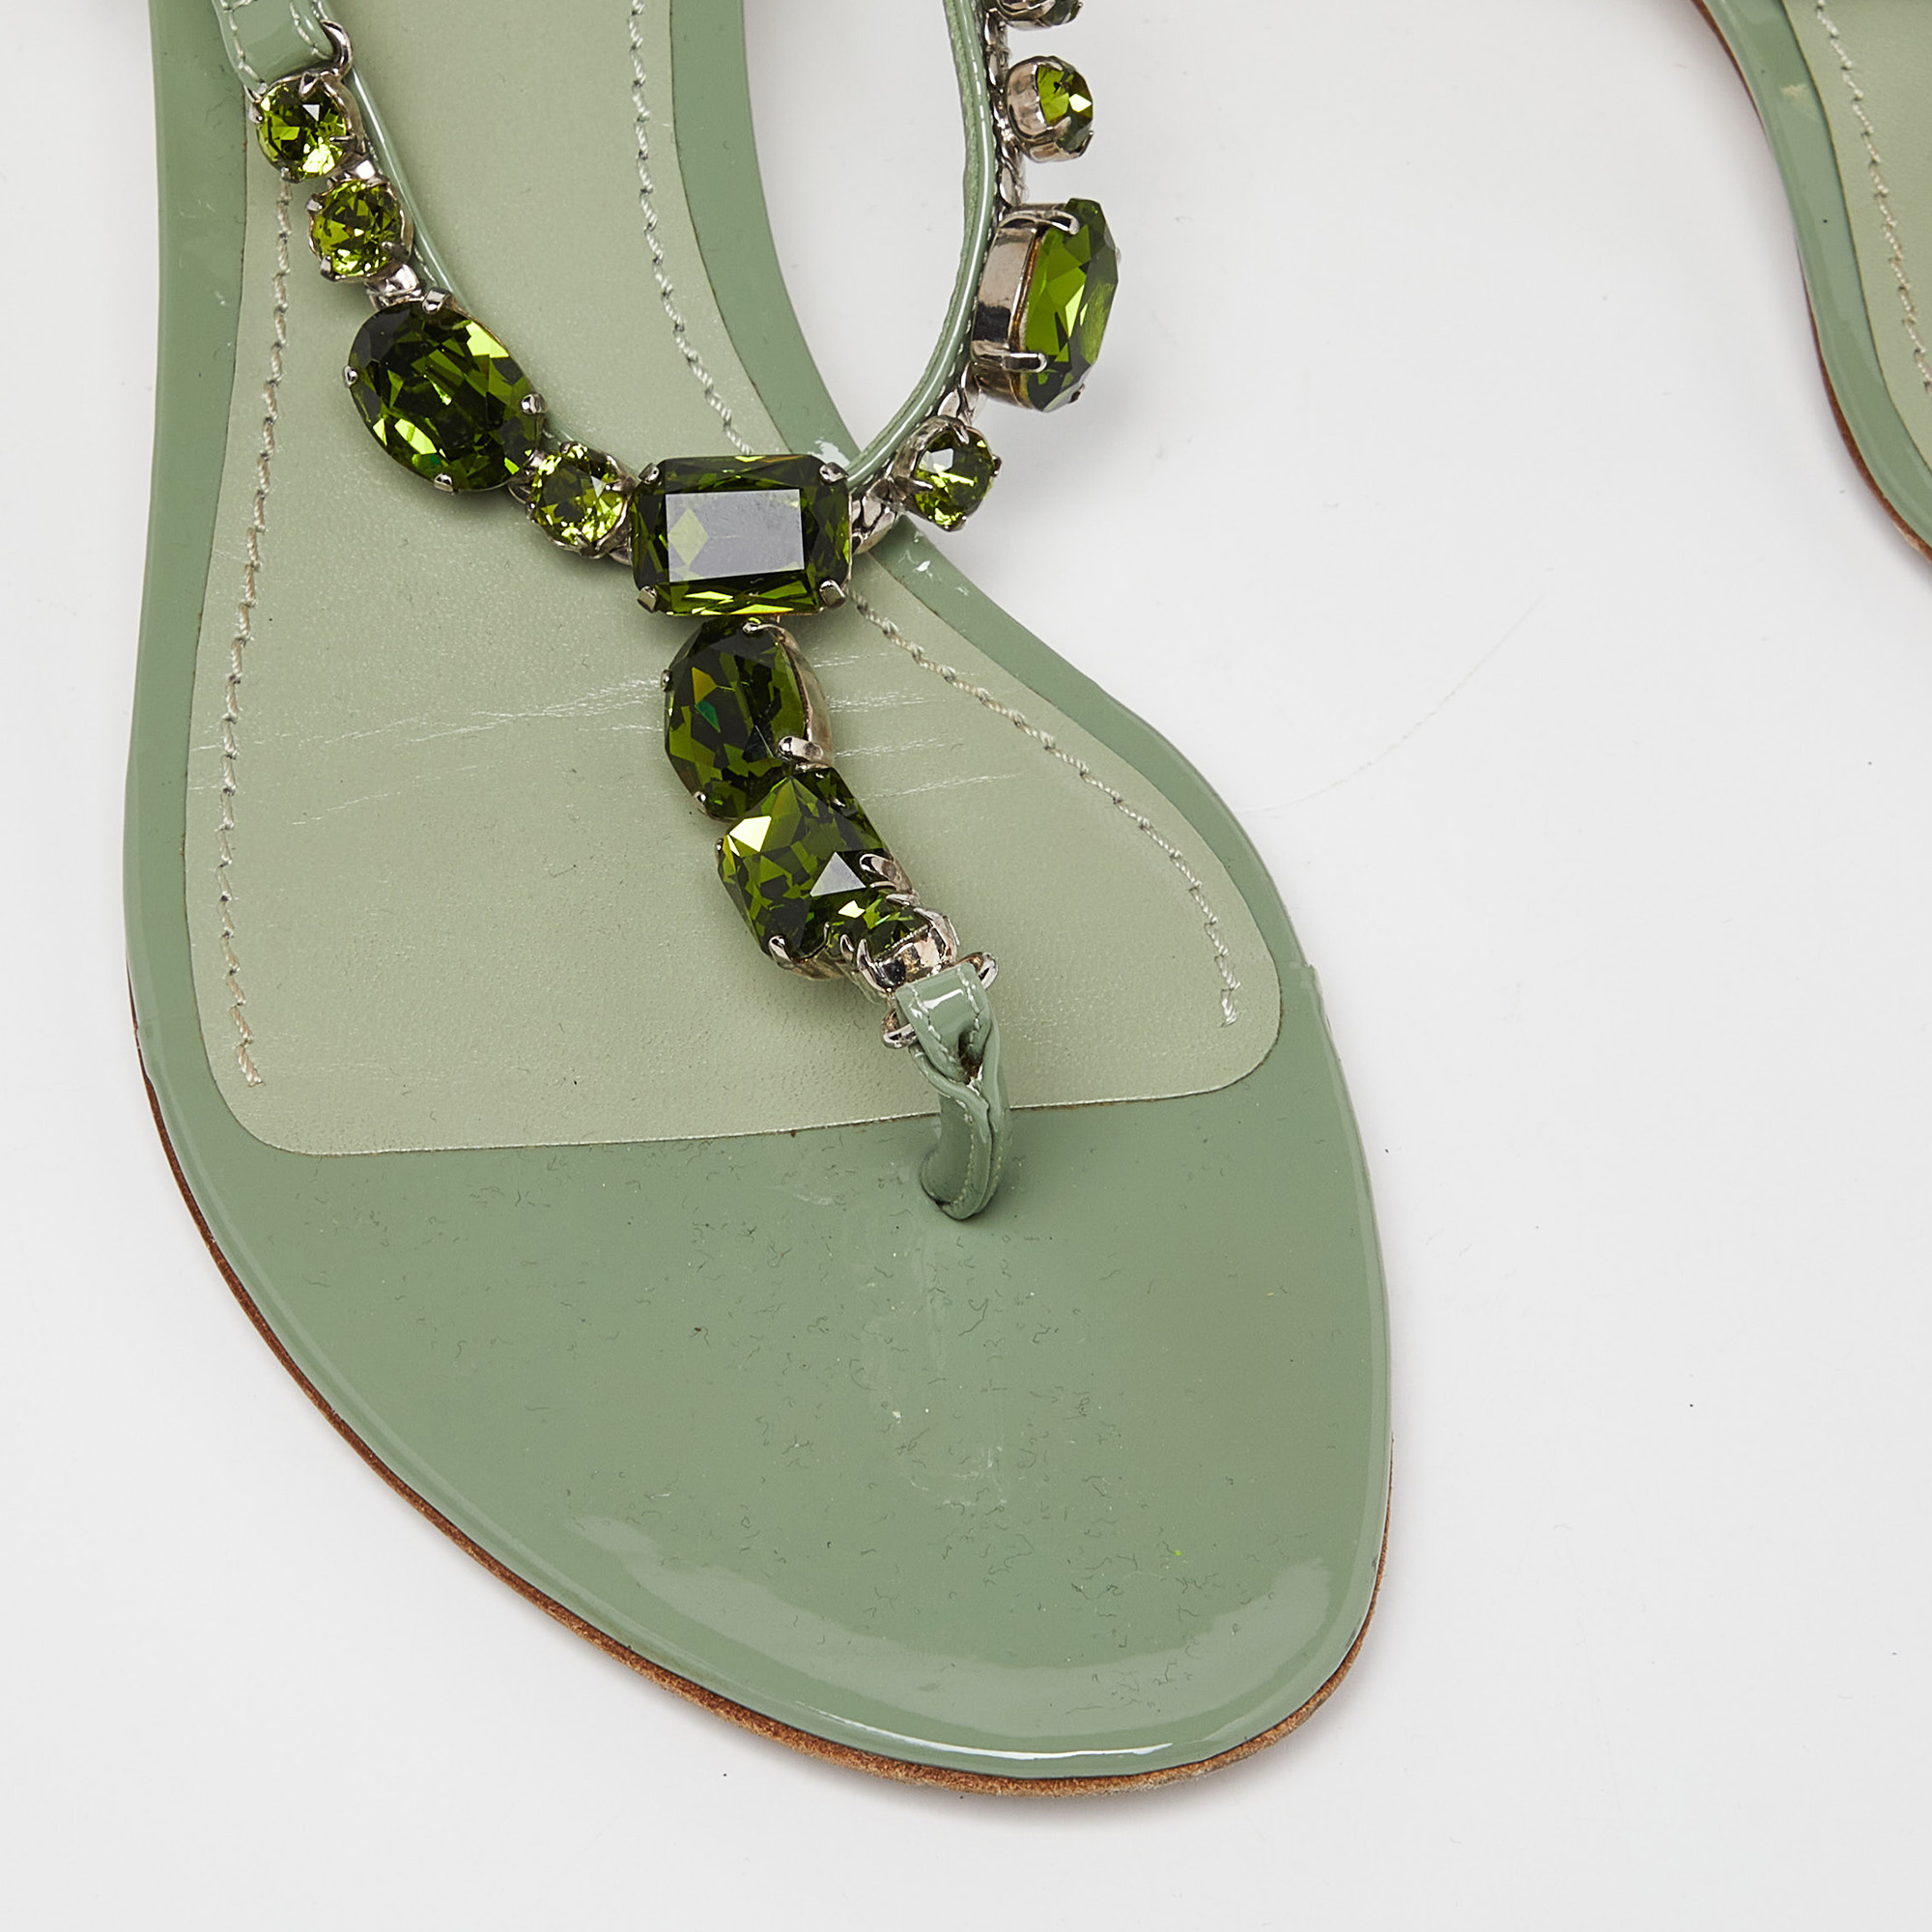 Dolce & Gabbana Green Patent Leather Crystal Embellished Thong Sandals Size 40